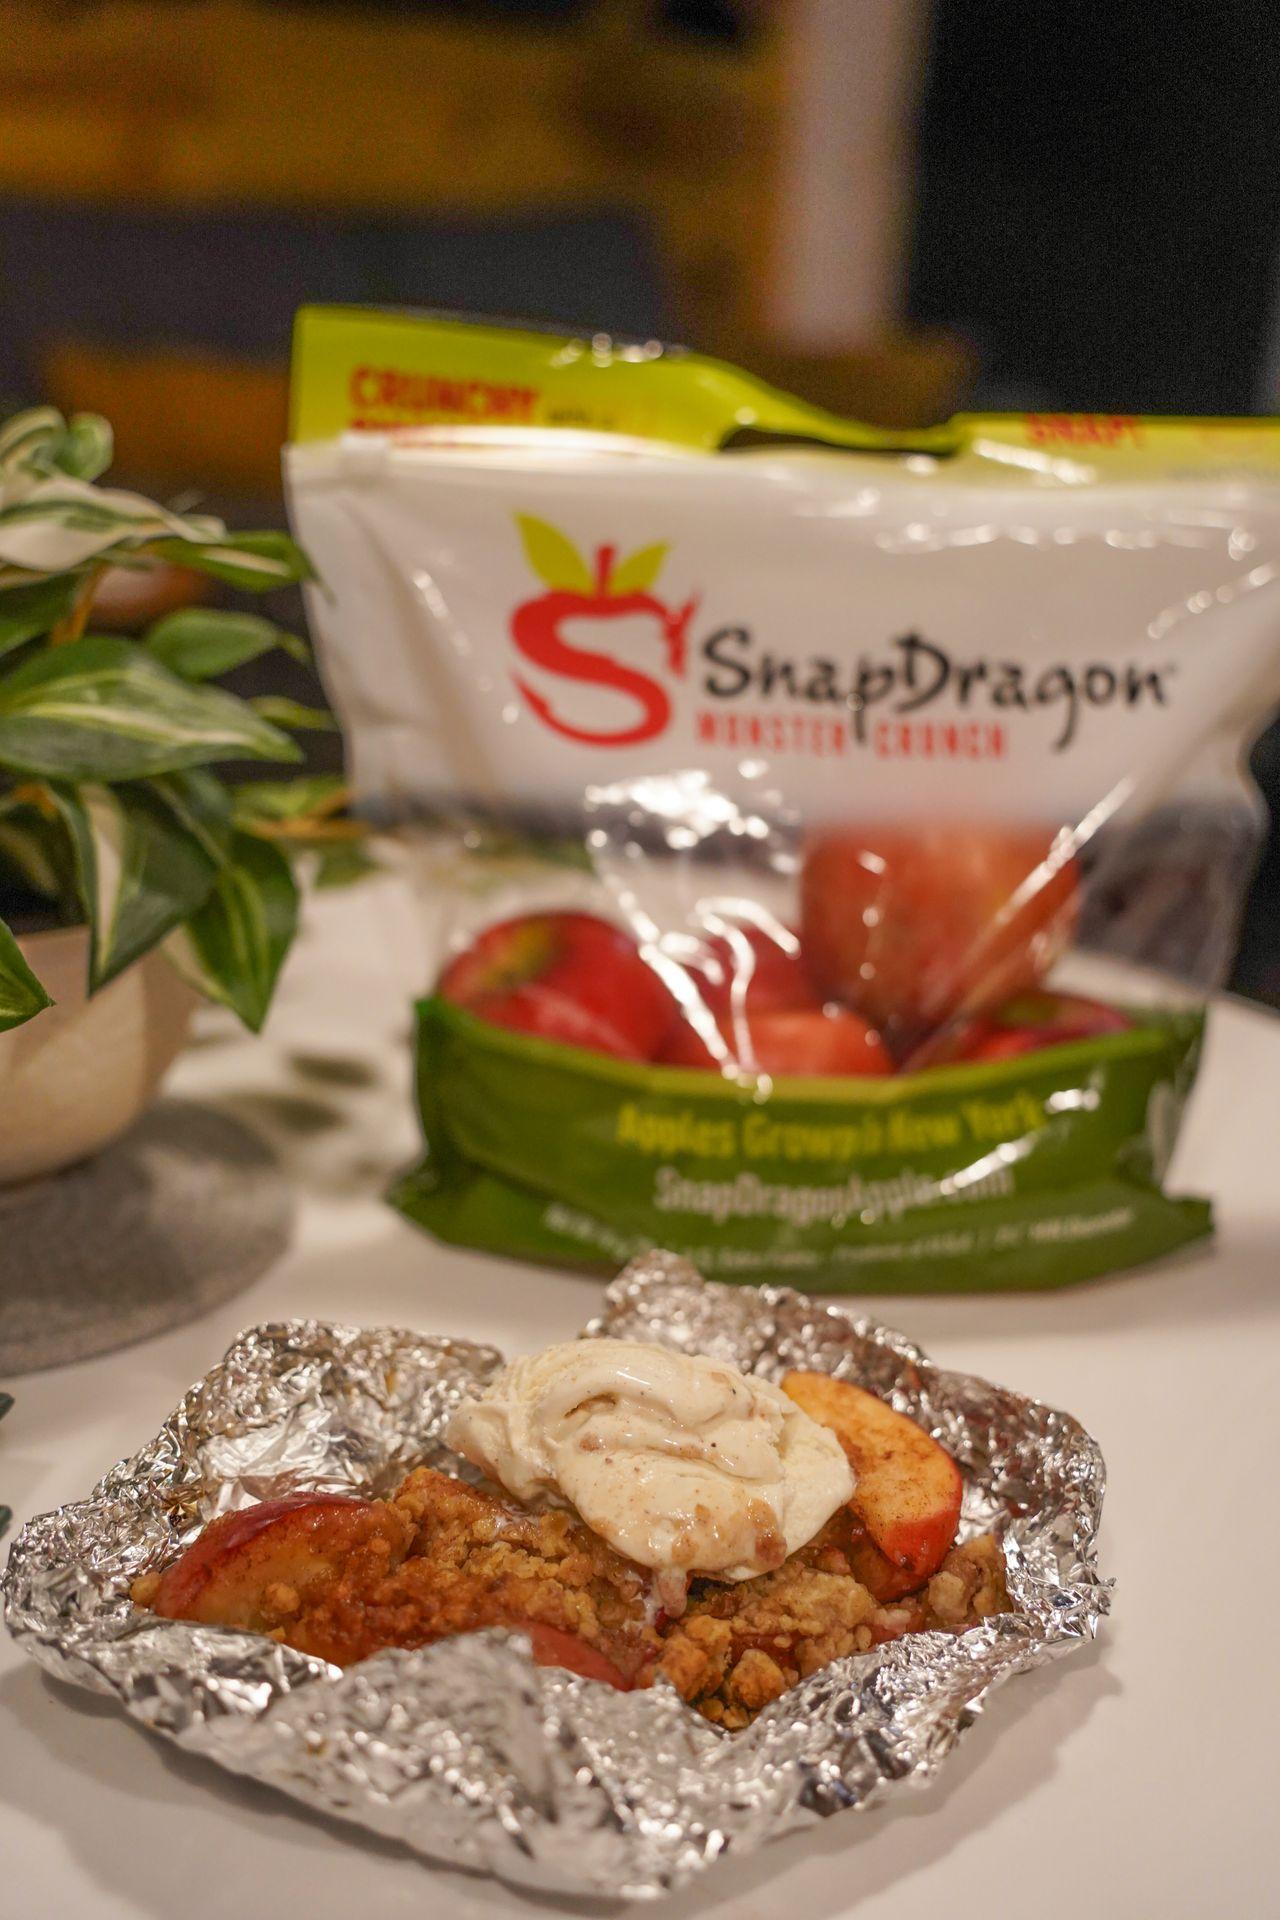 An apple tart with inside a foil packet, topped with ice cream. A bag of SnapDragon apples sits on the table in the background.